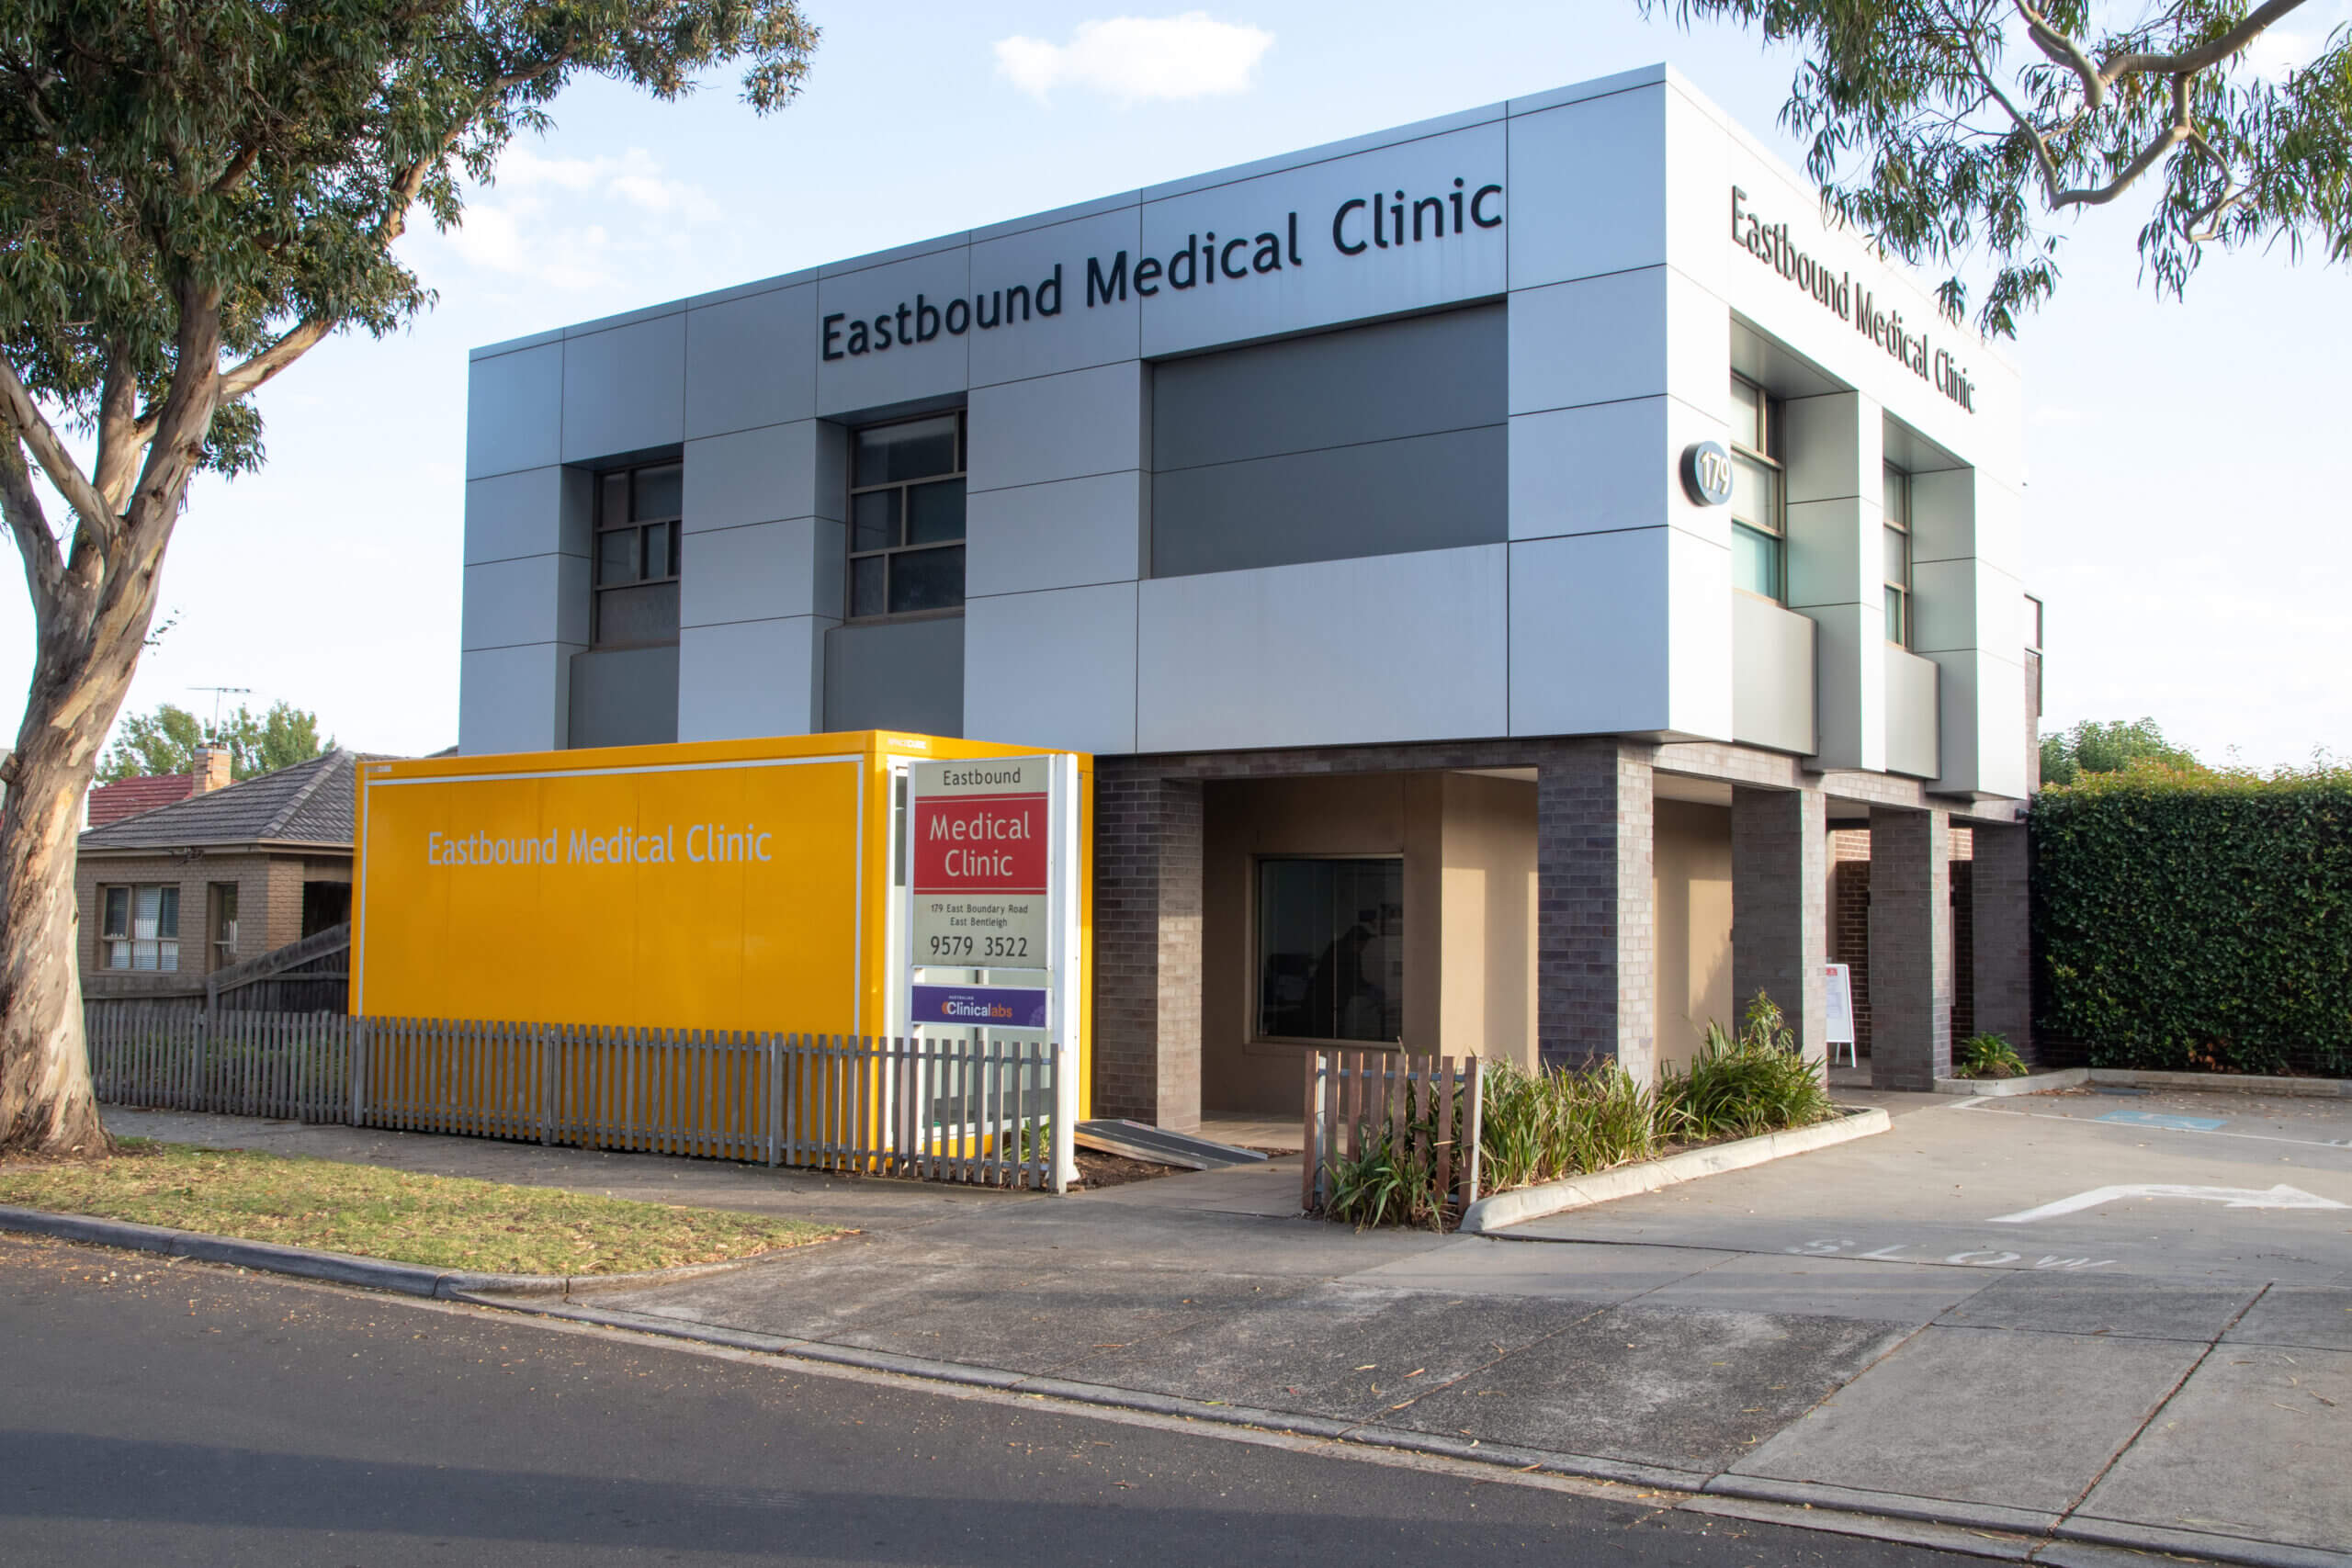 Eastbound Medical Clinic building with Spacecube in front